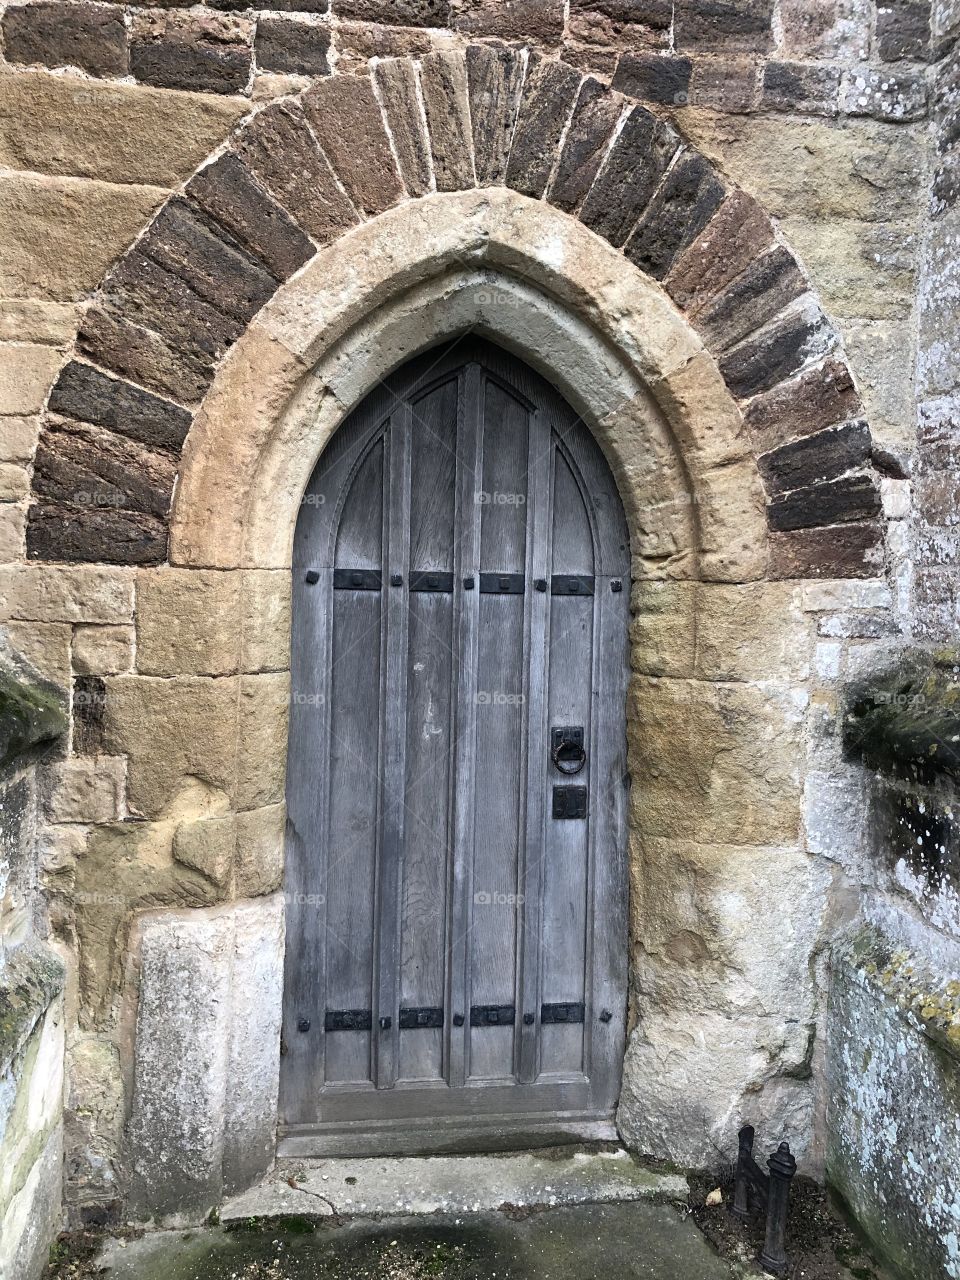 One of two of some of the side entrances of this impressive Devon, UK church.